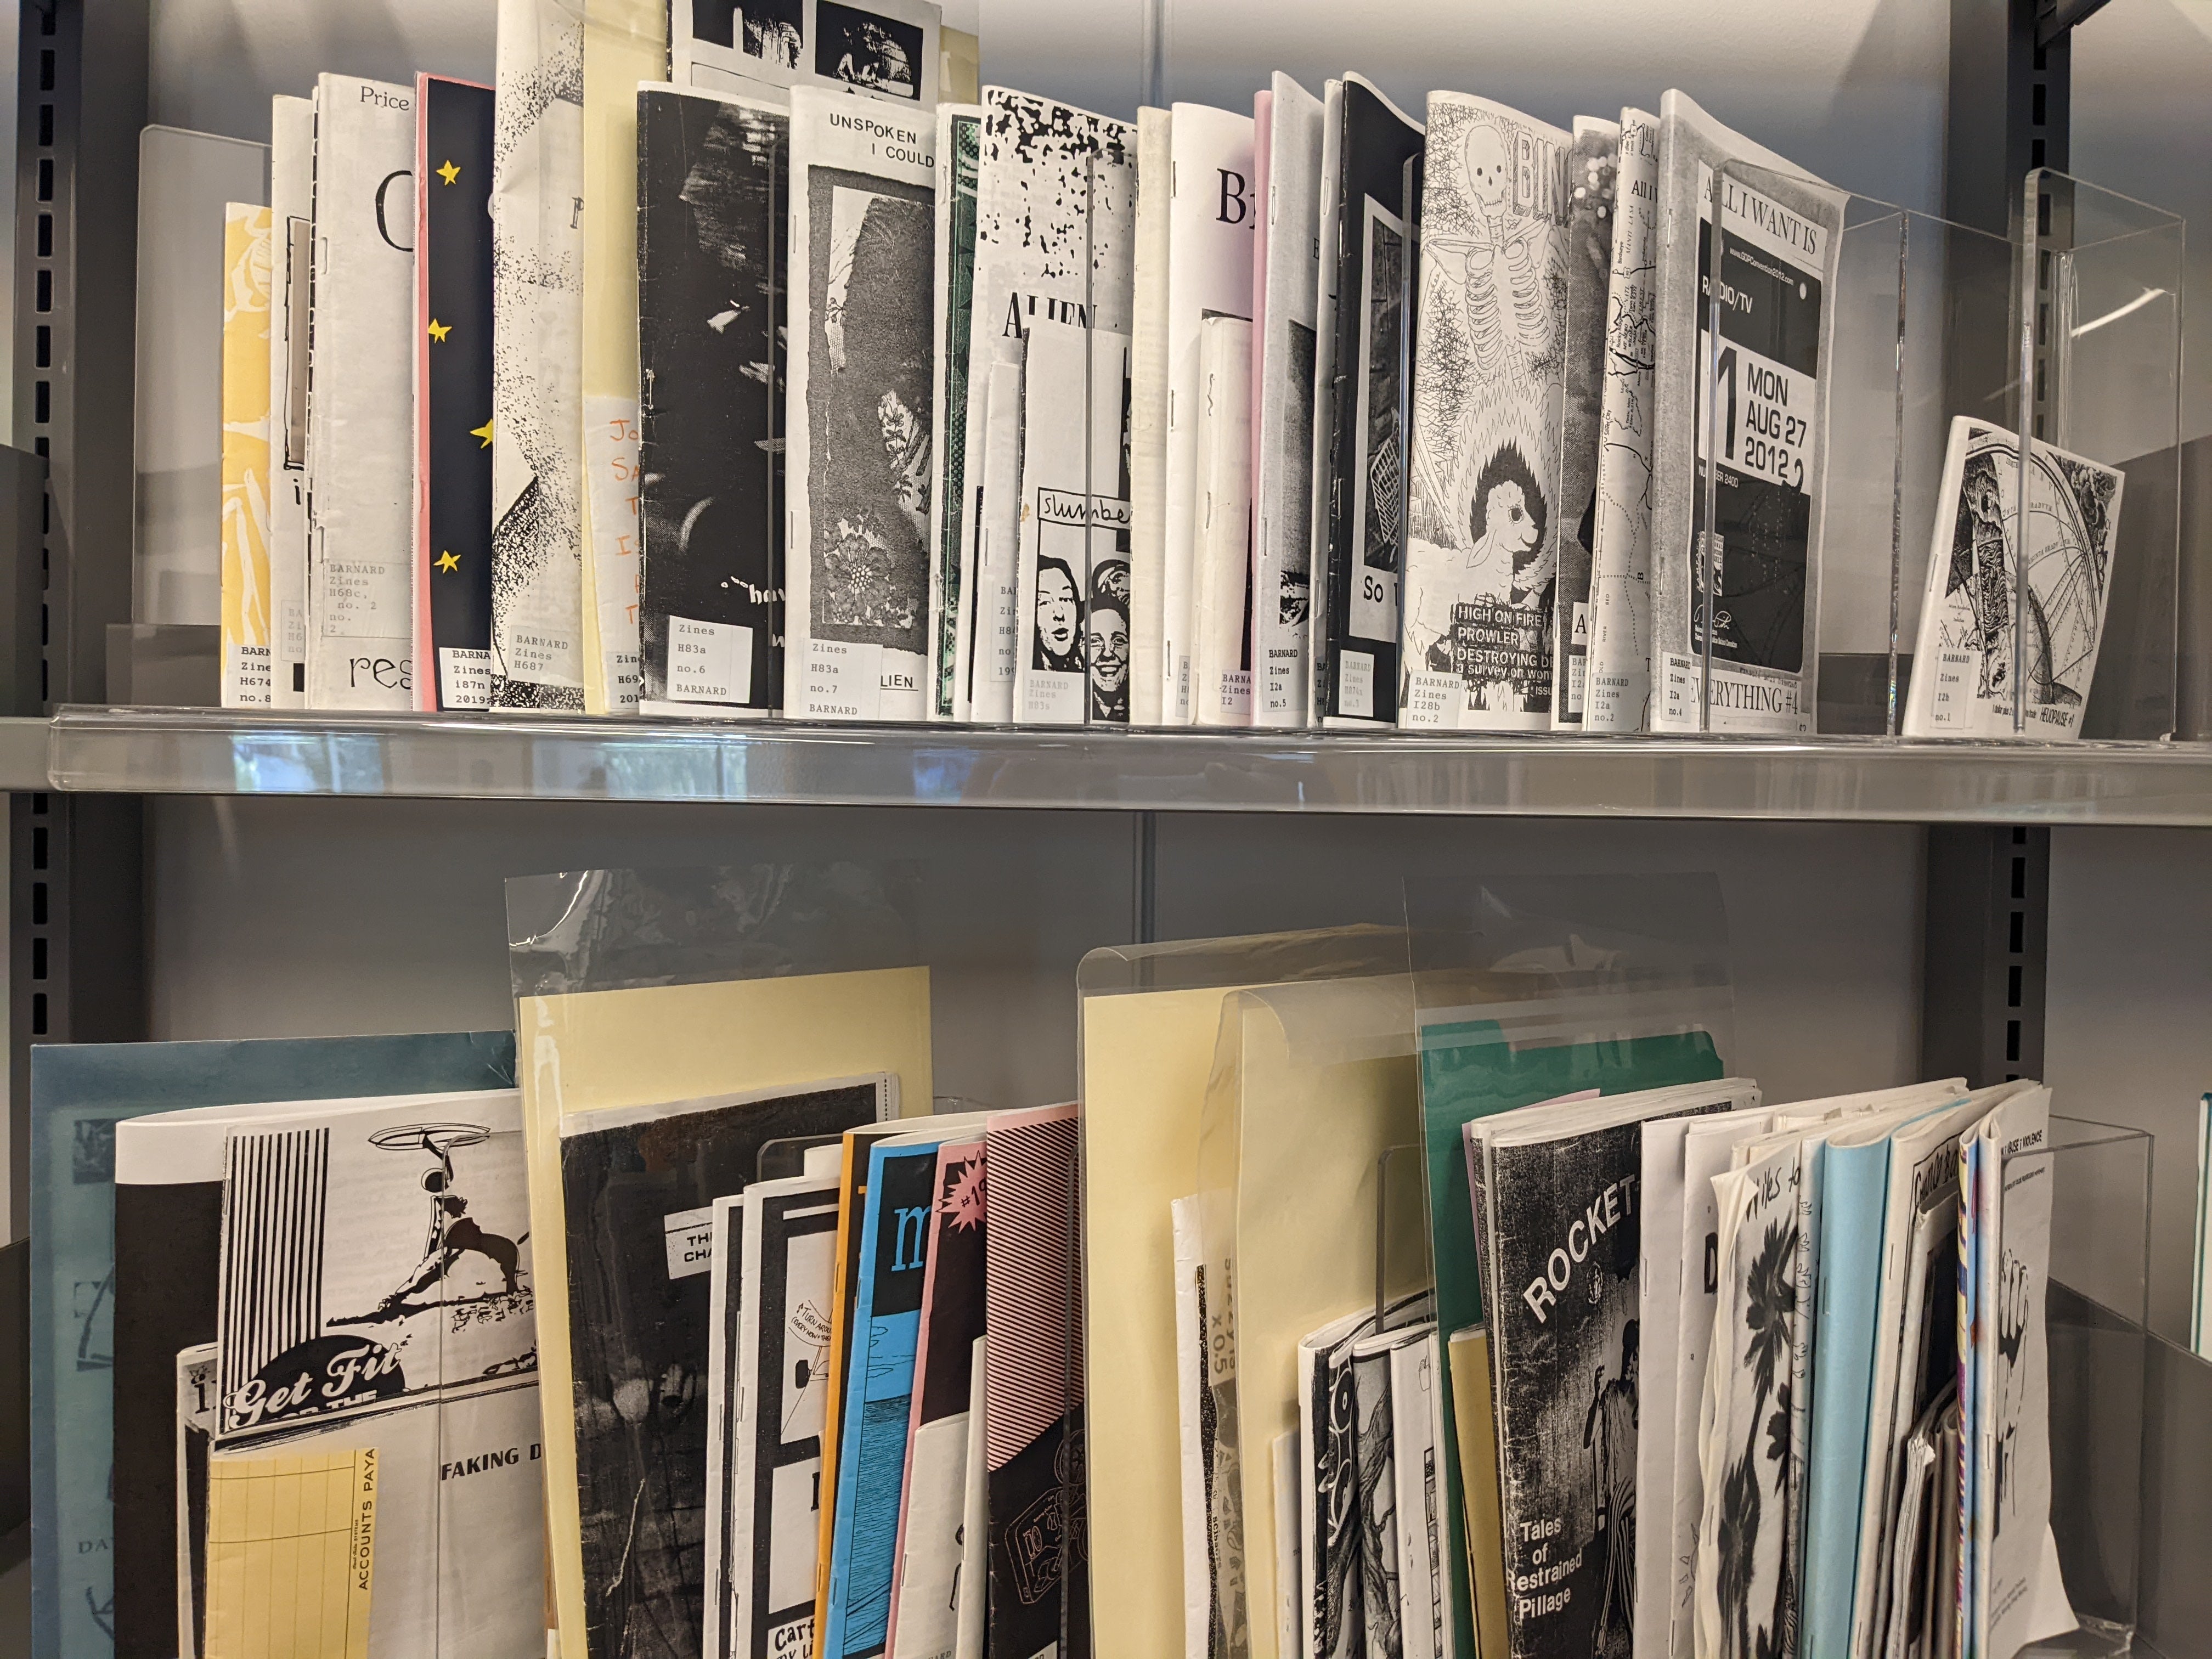 A photograph of two shelves with plastic shelving with lined up zines featured